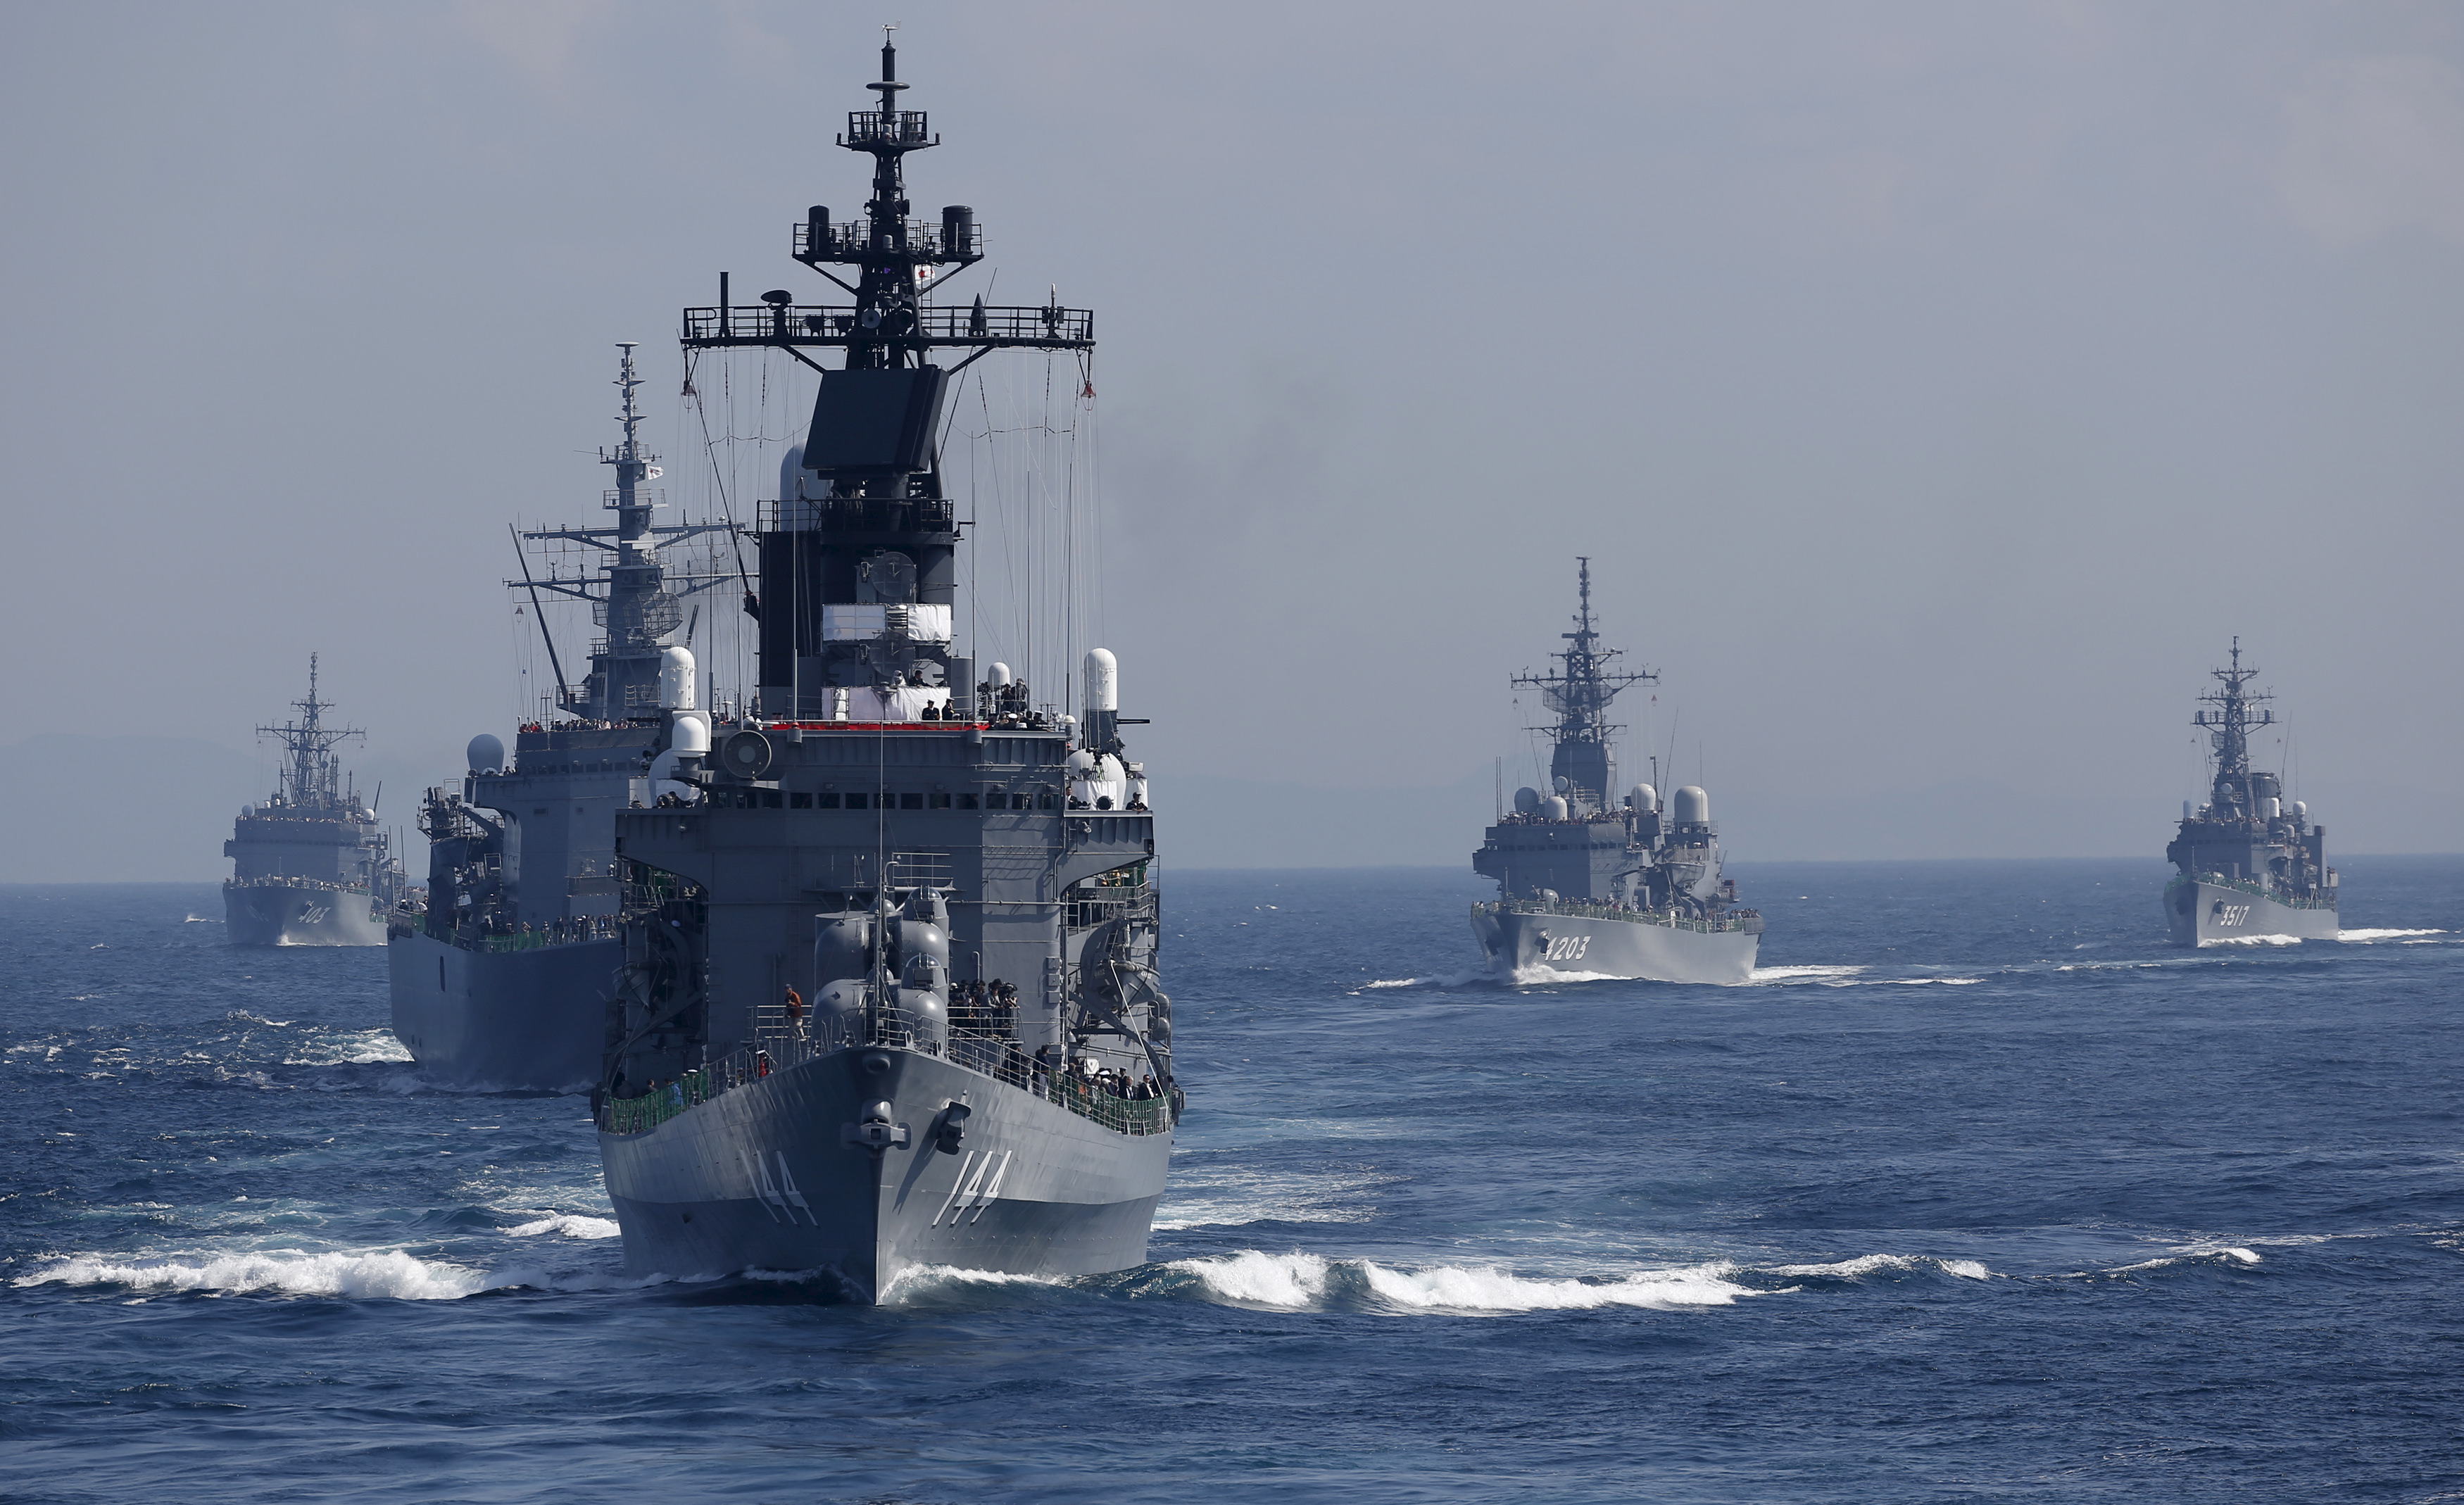 Japan's Maritime Self-Defense Force (JMSDF) destroyer Kurama (front), which is carrying Japan's Prime Minister Shinzo Abe, leads the MSDF fleet during its fleet review at Sagami Bay, off Yokosuka, south of Tokyo October 18, 2015. (Toru Hanai—REUTERS)